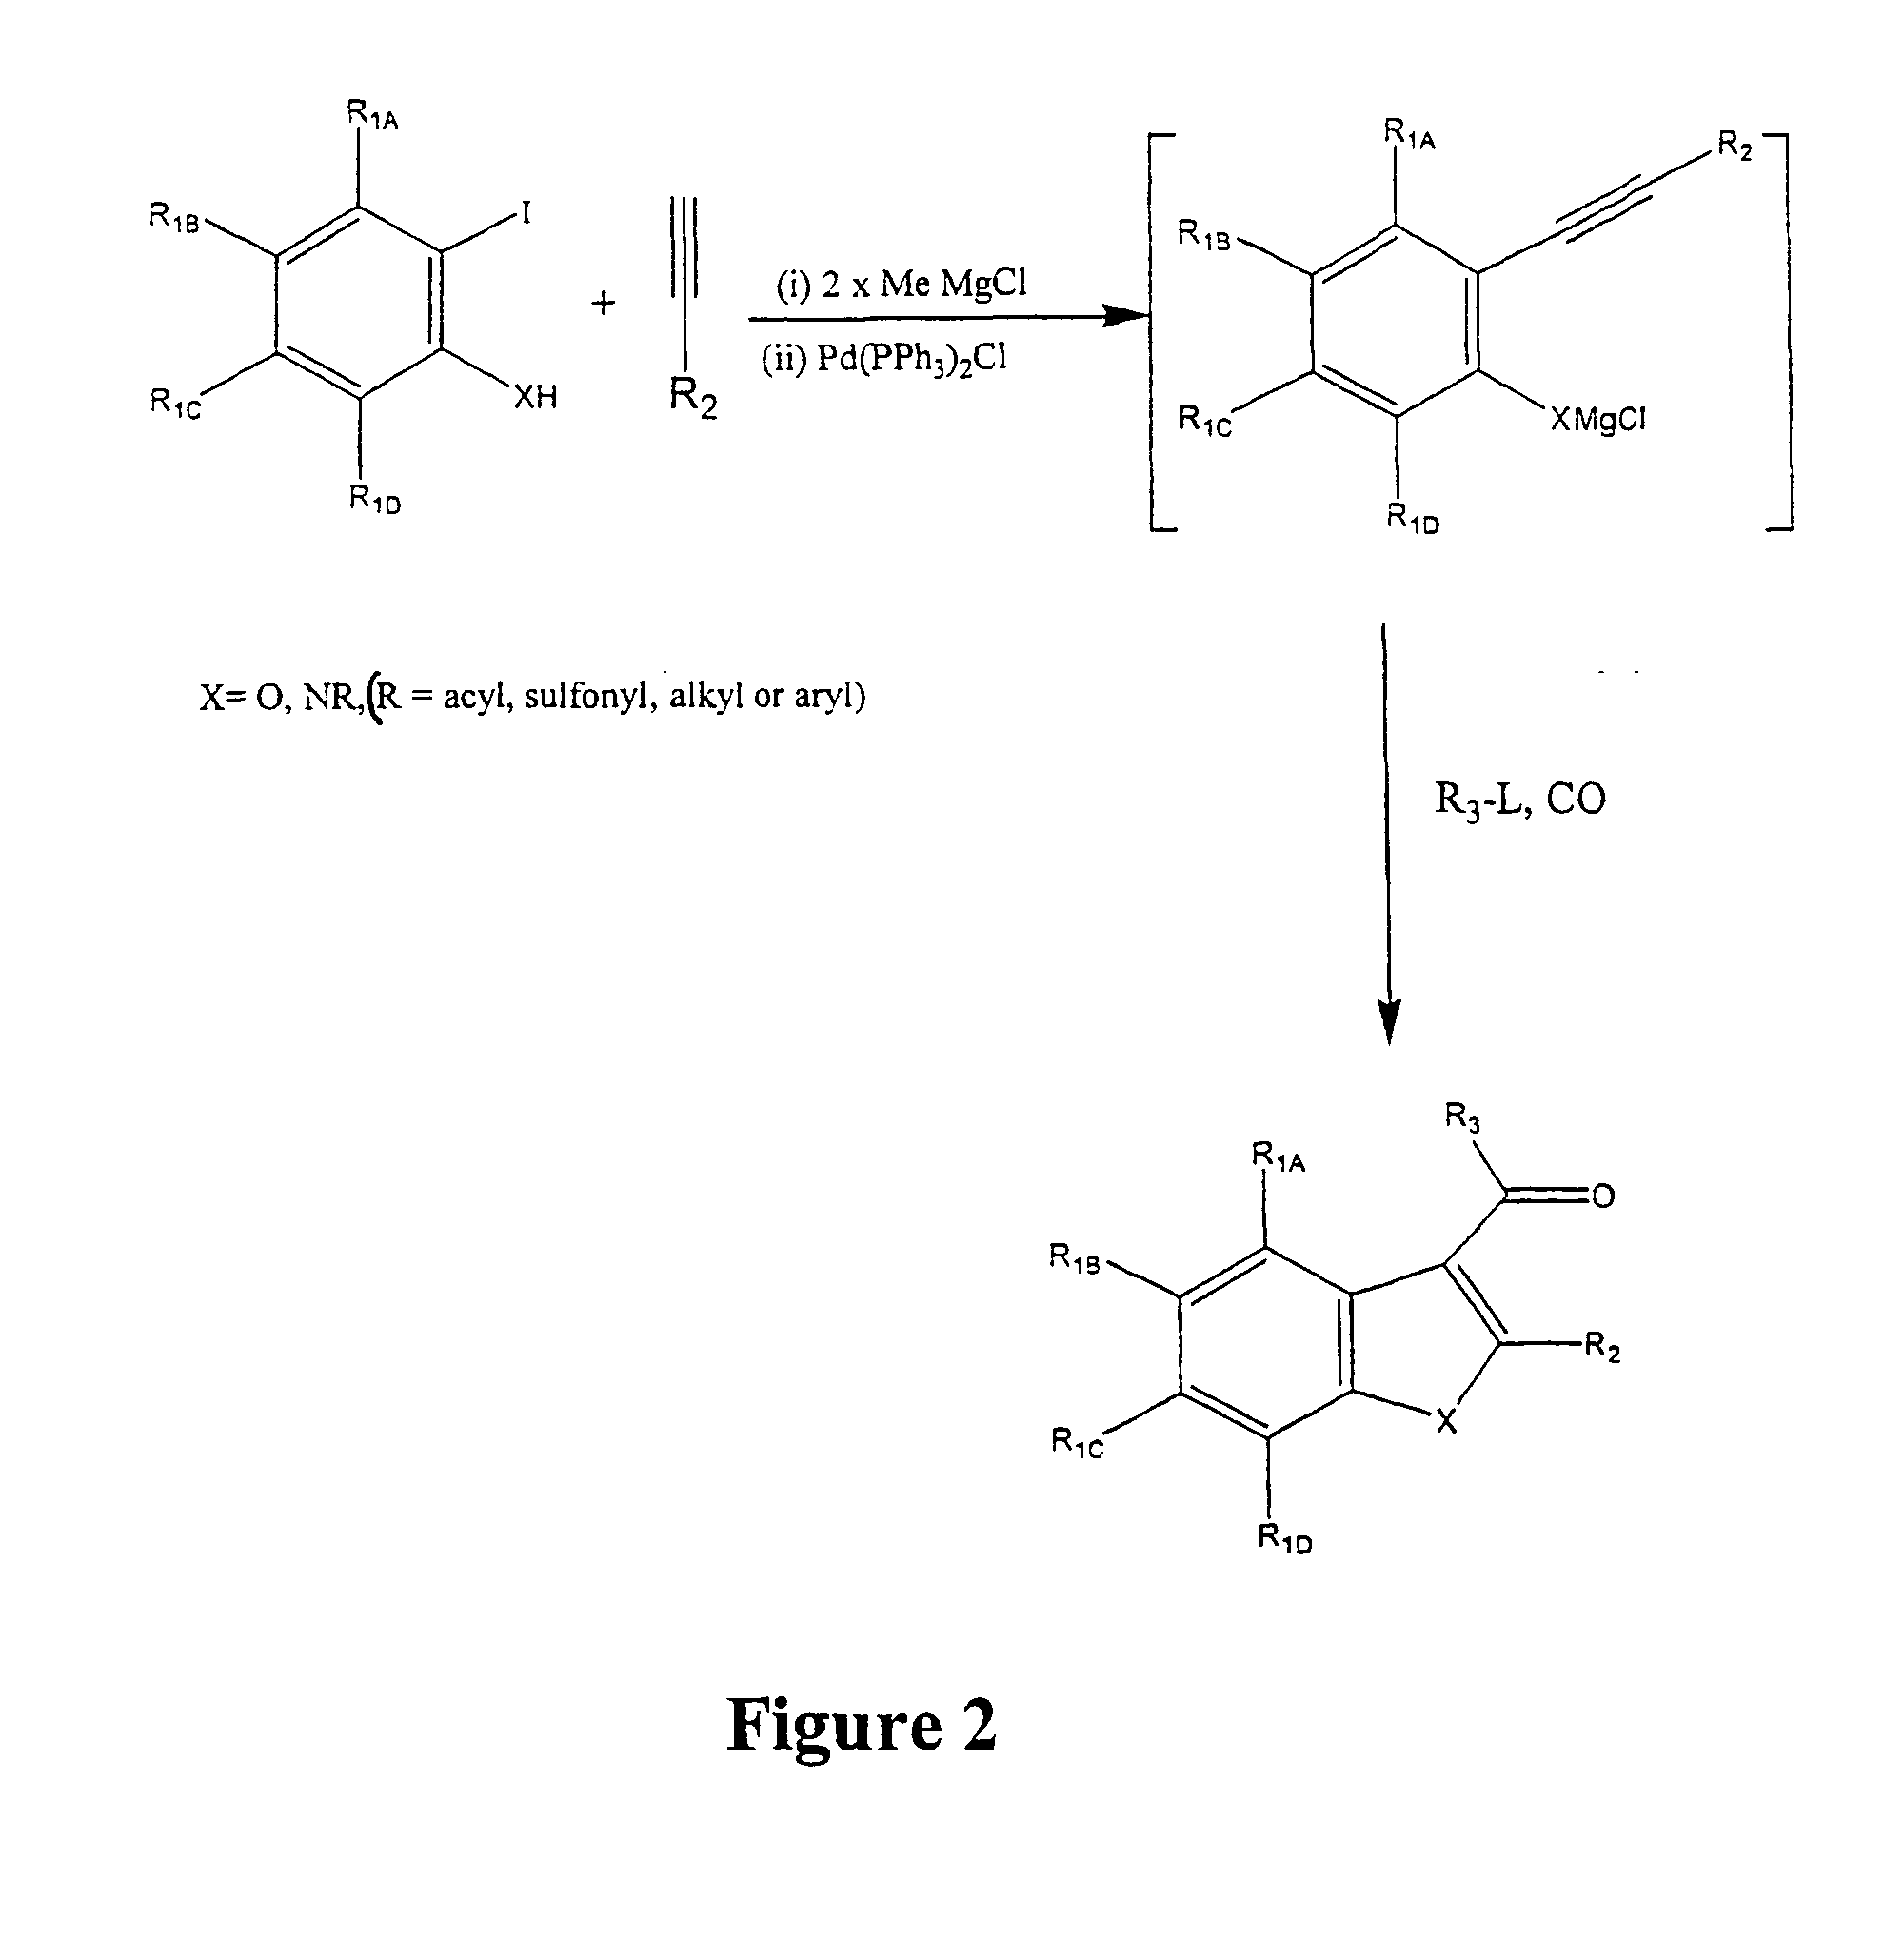 Synthesis for the preparation of compounds for screening as potential tubulin binding agents